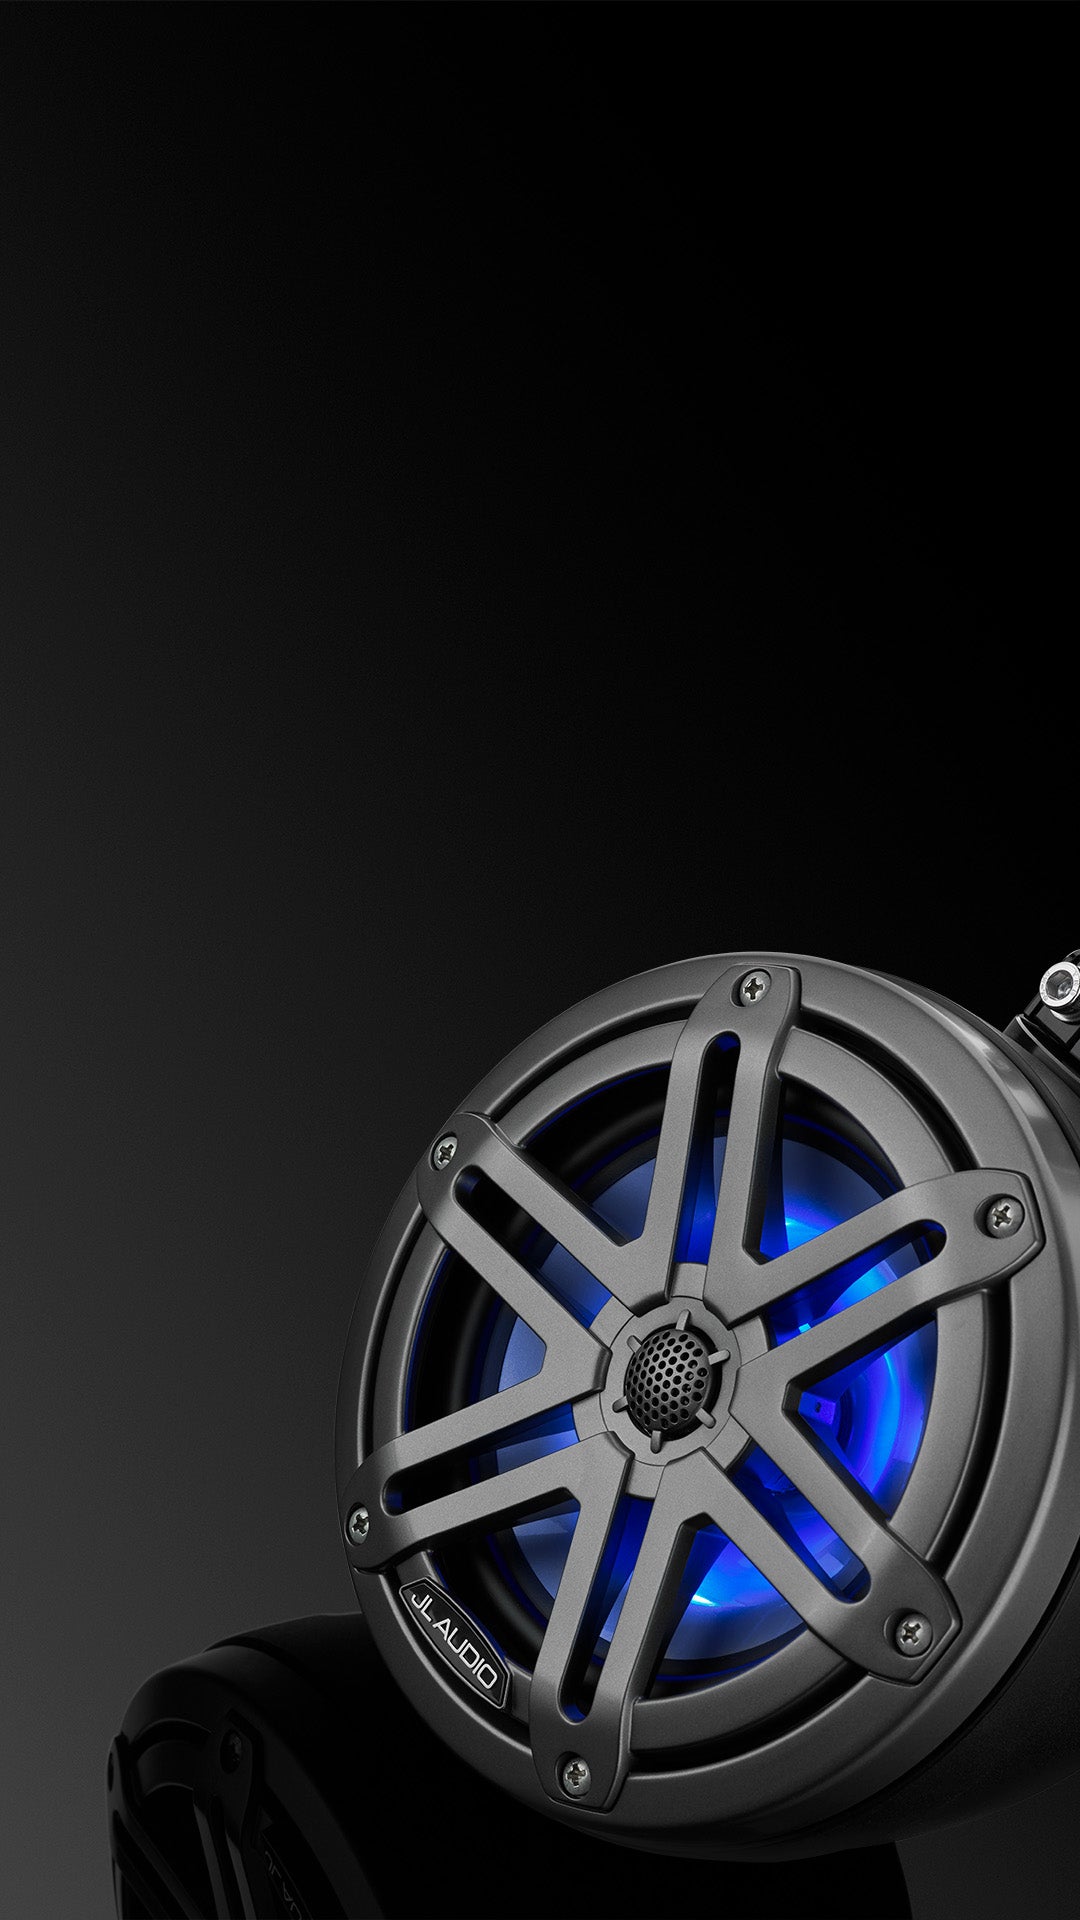 A white M3 VeX audio unit with blue colored LED in a dark sleek setting.